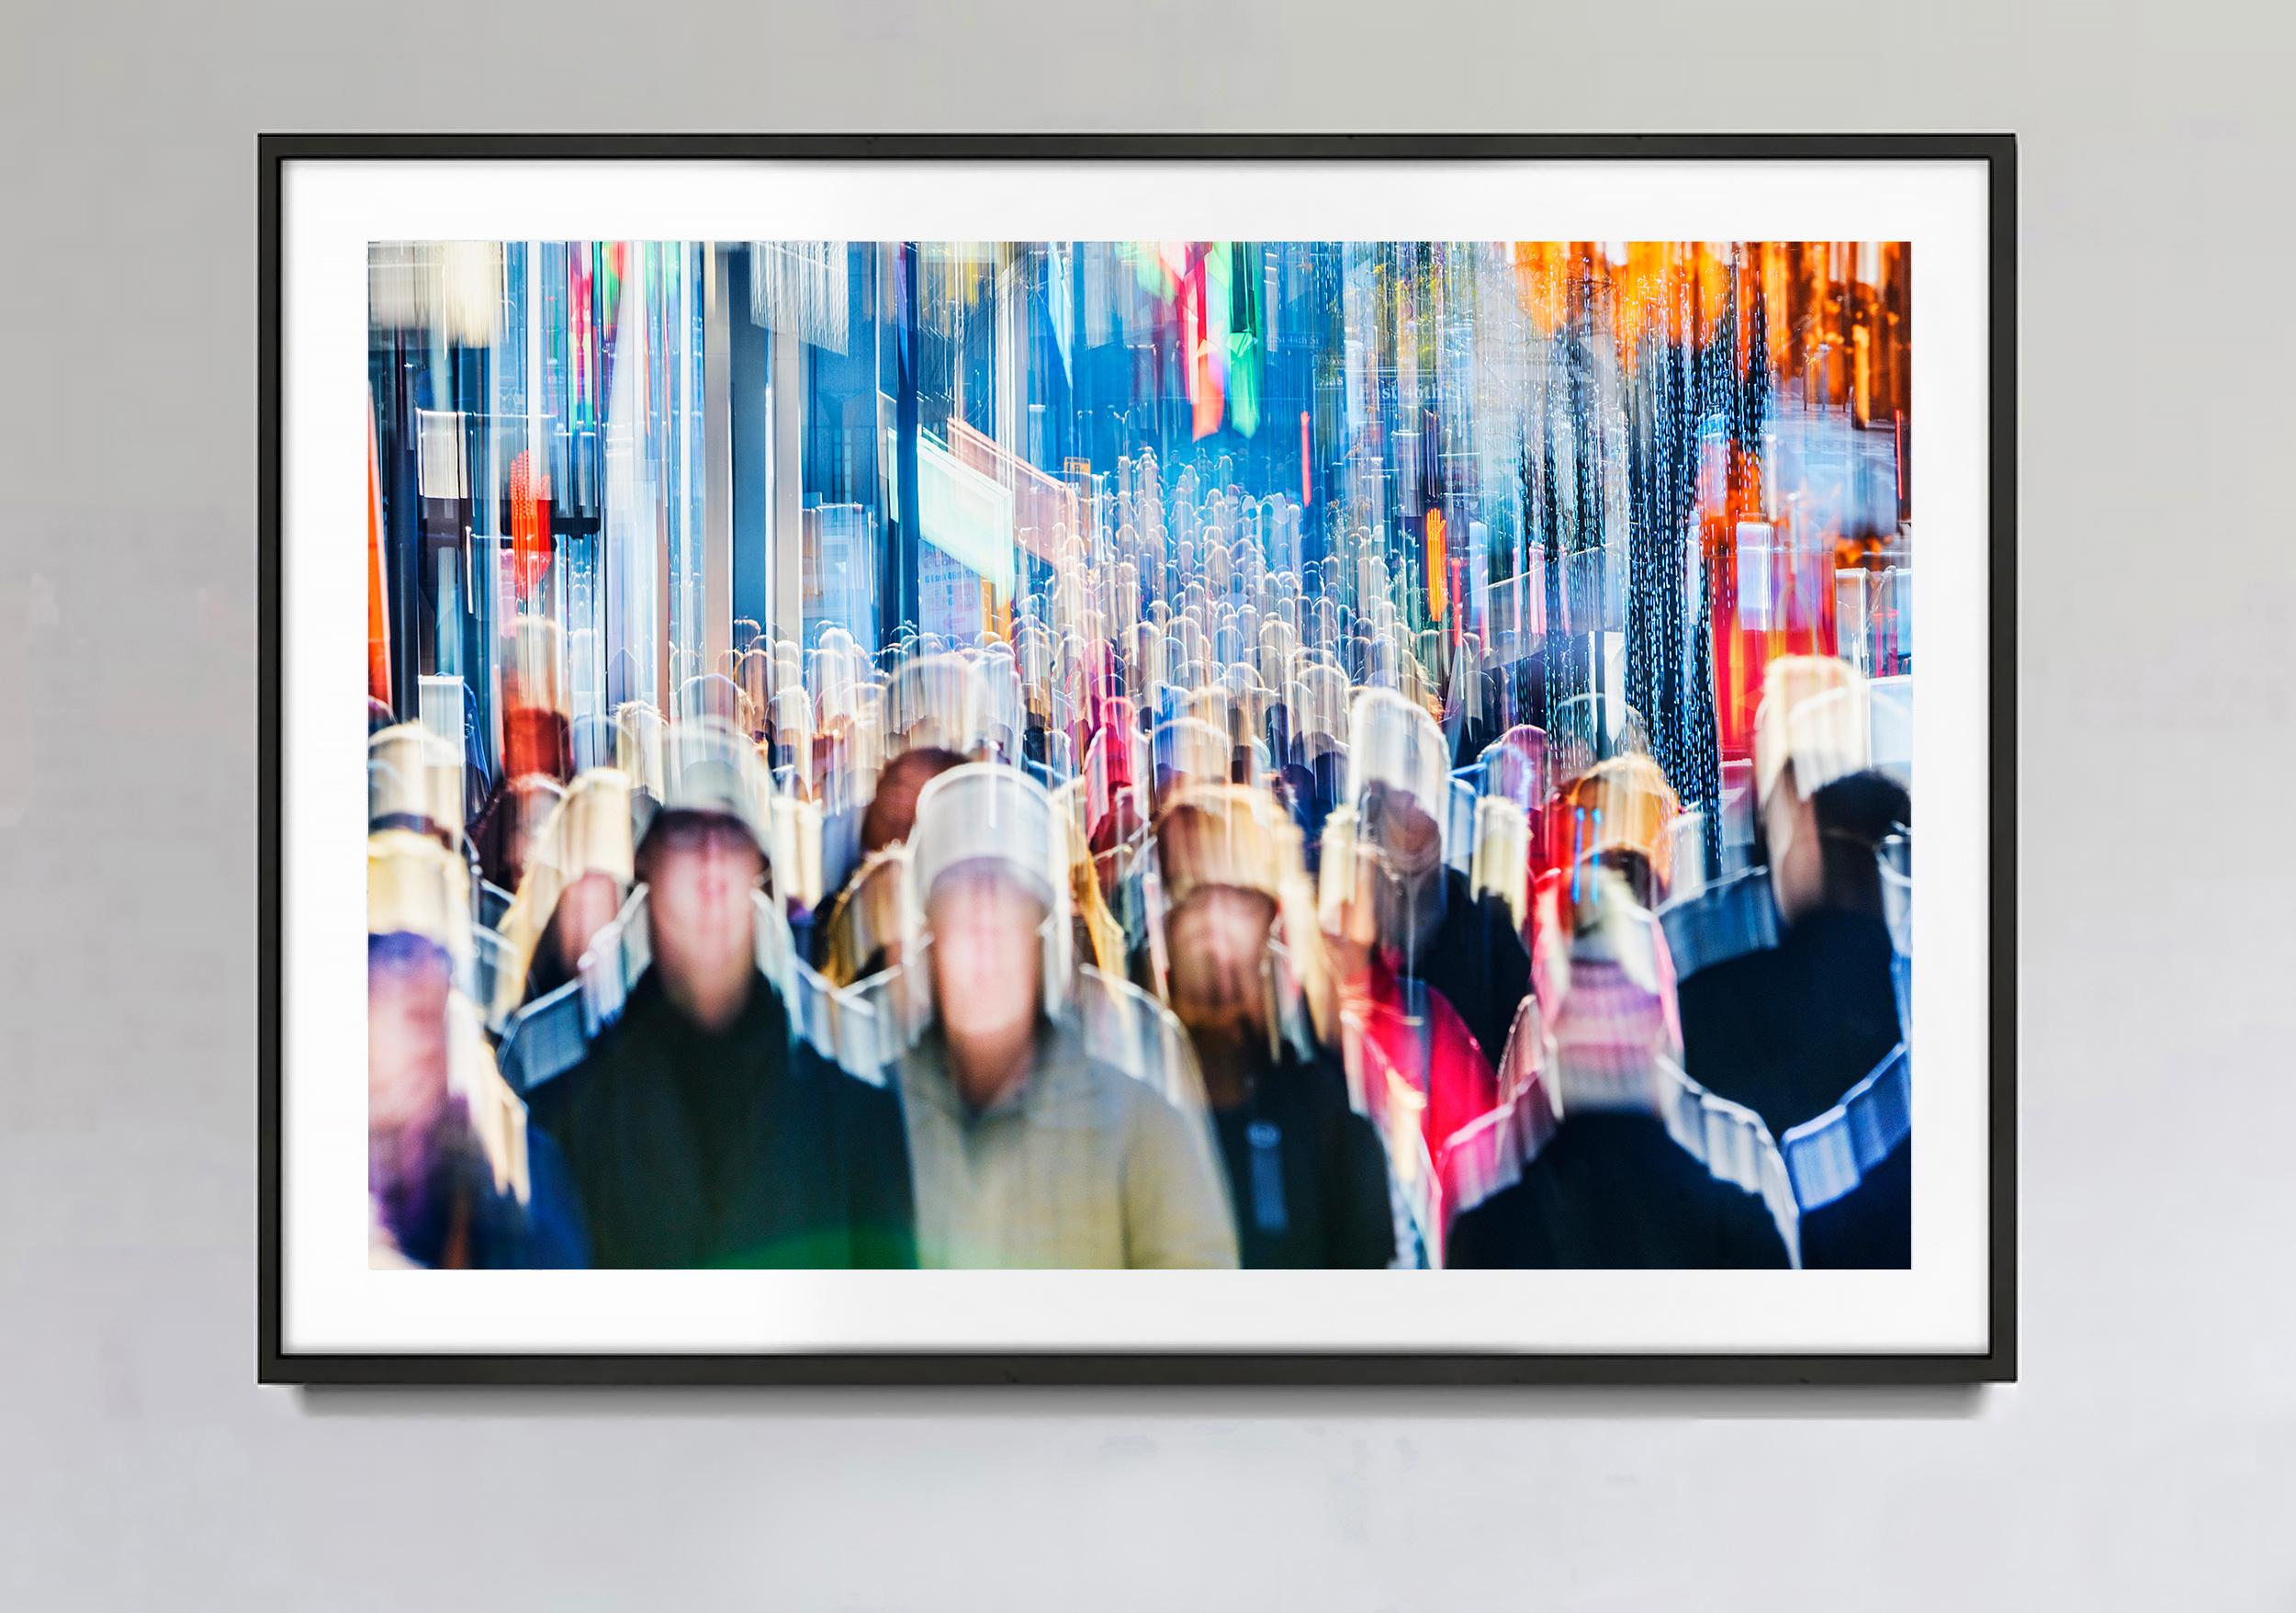 Abstract View Of Crowds On Fifth Avenue, New York City  - Photograph by Mitchell Funk